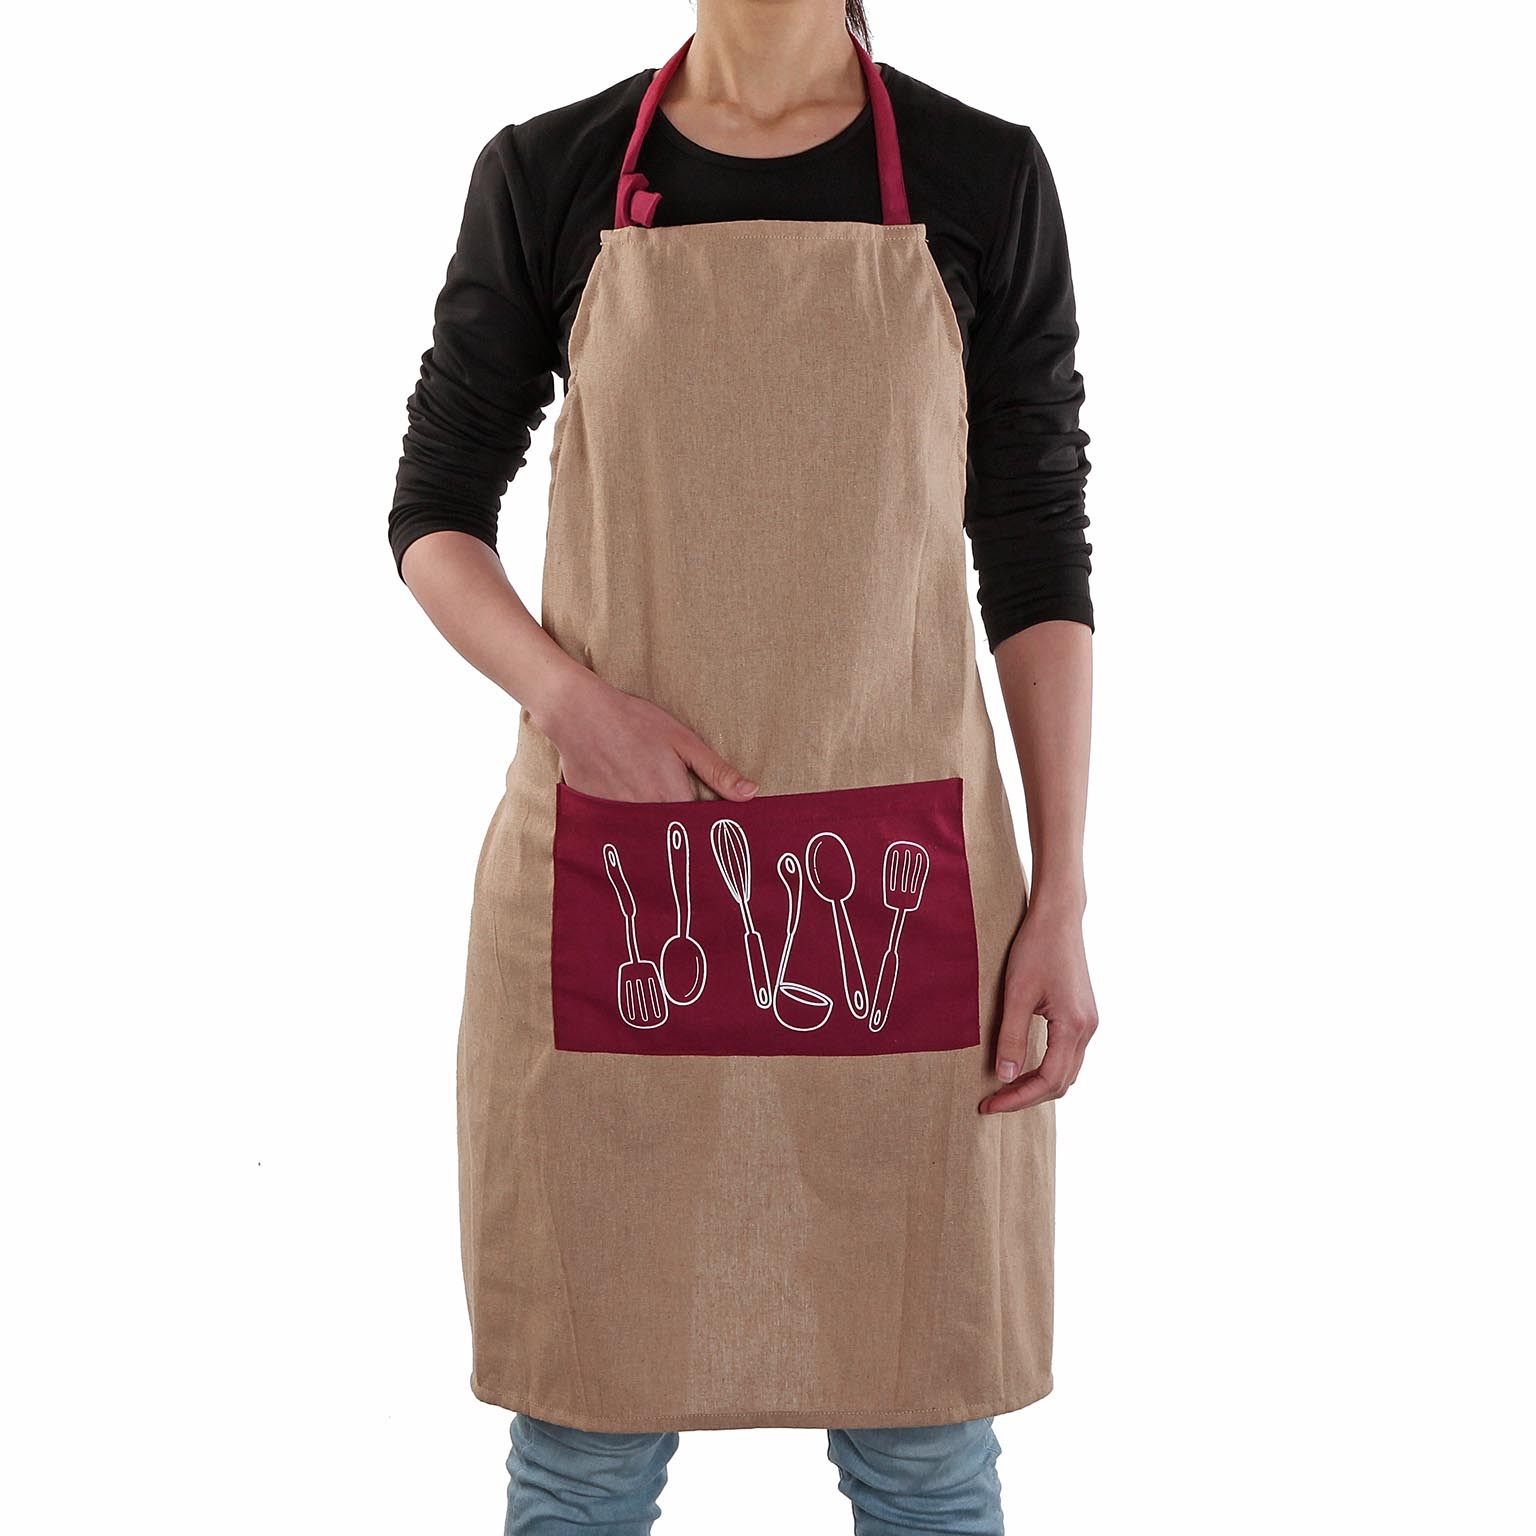 Personalized Name Apron, Professional Chef Bib Apron With Pockets, Bakery  Apron, Kitchen Cooking BBQ Apron Adult Size for Women Men - Etsy